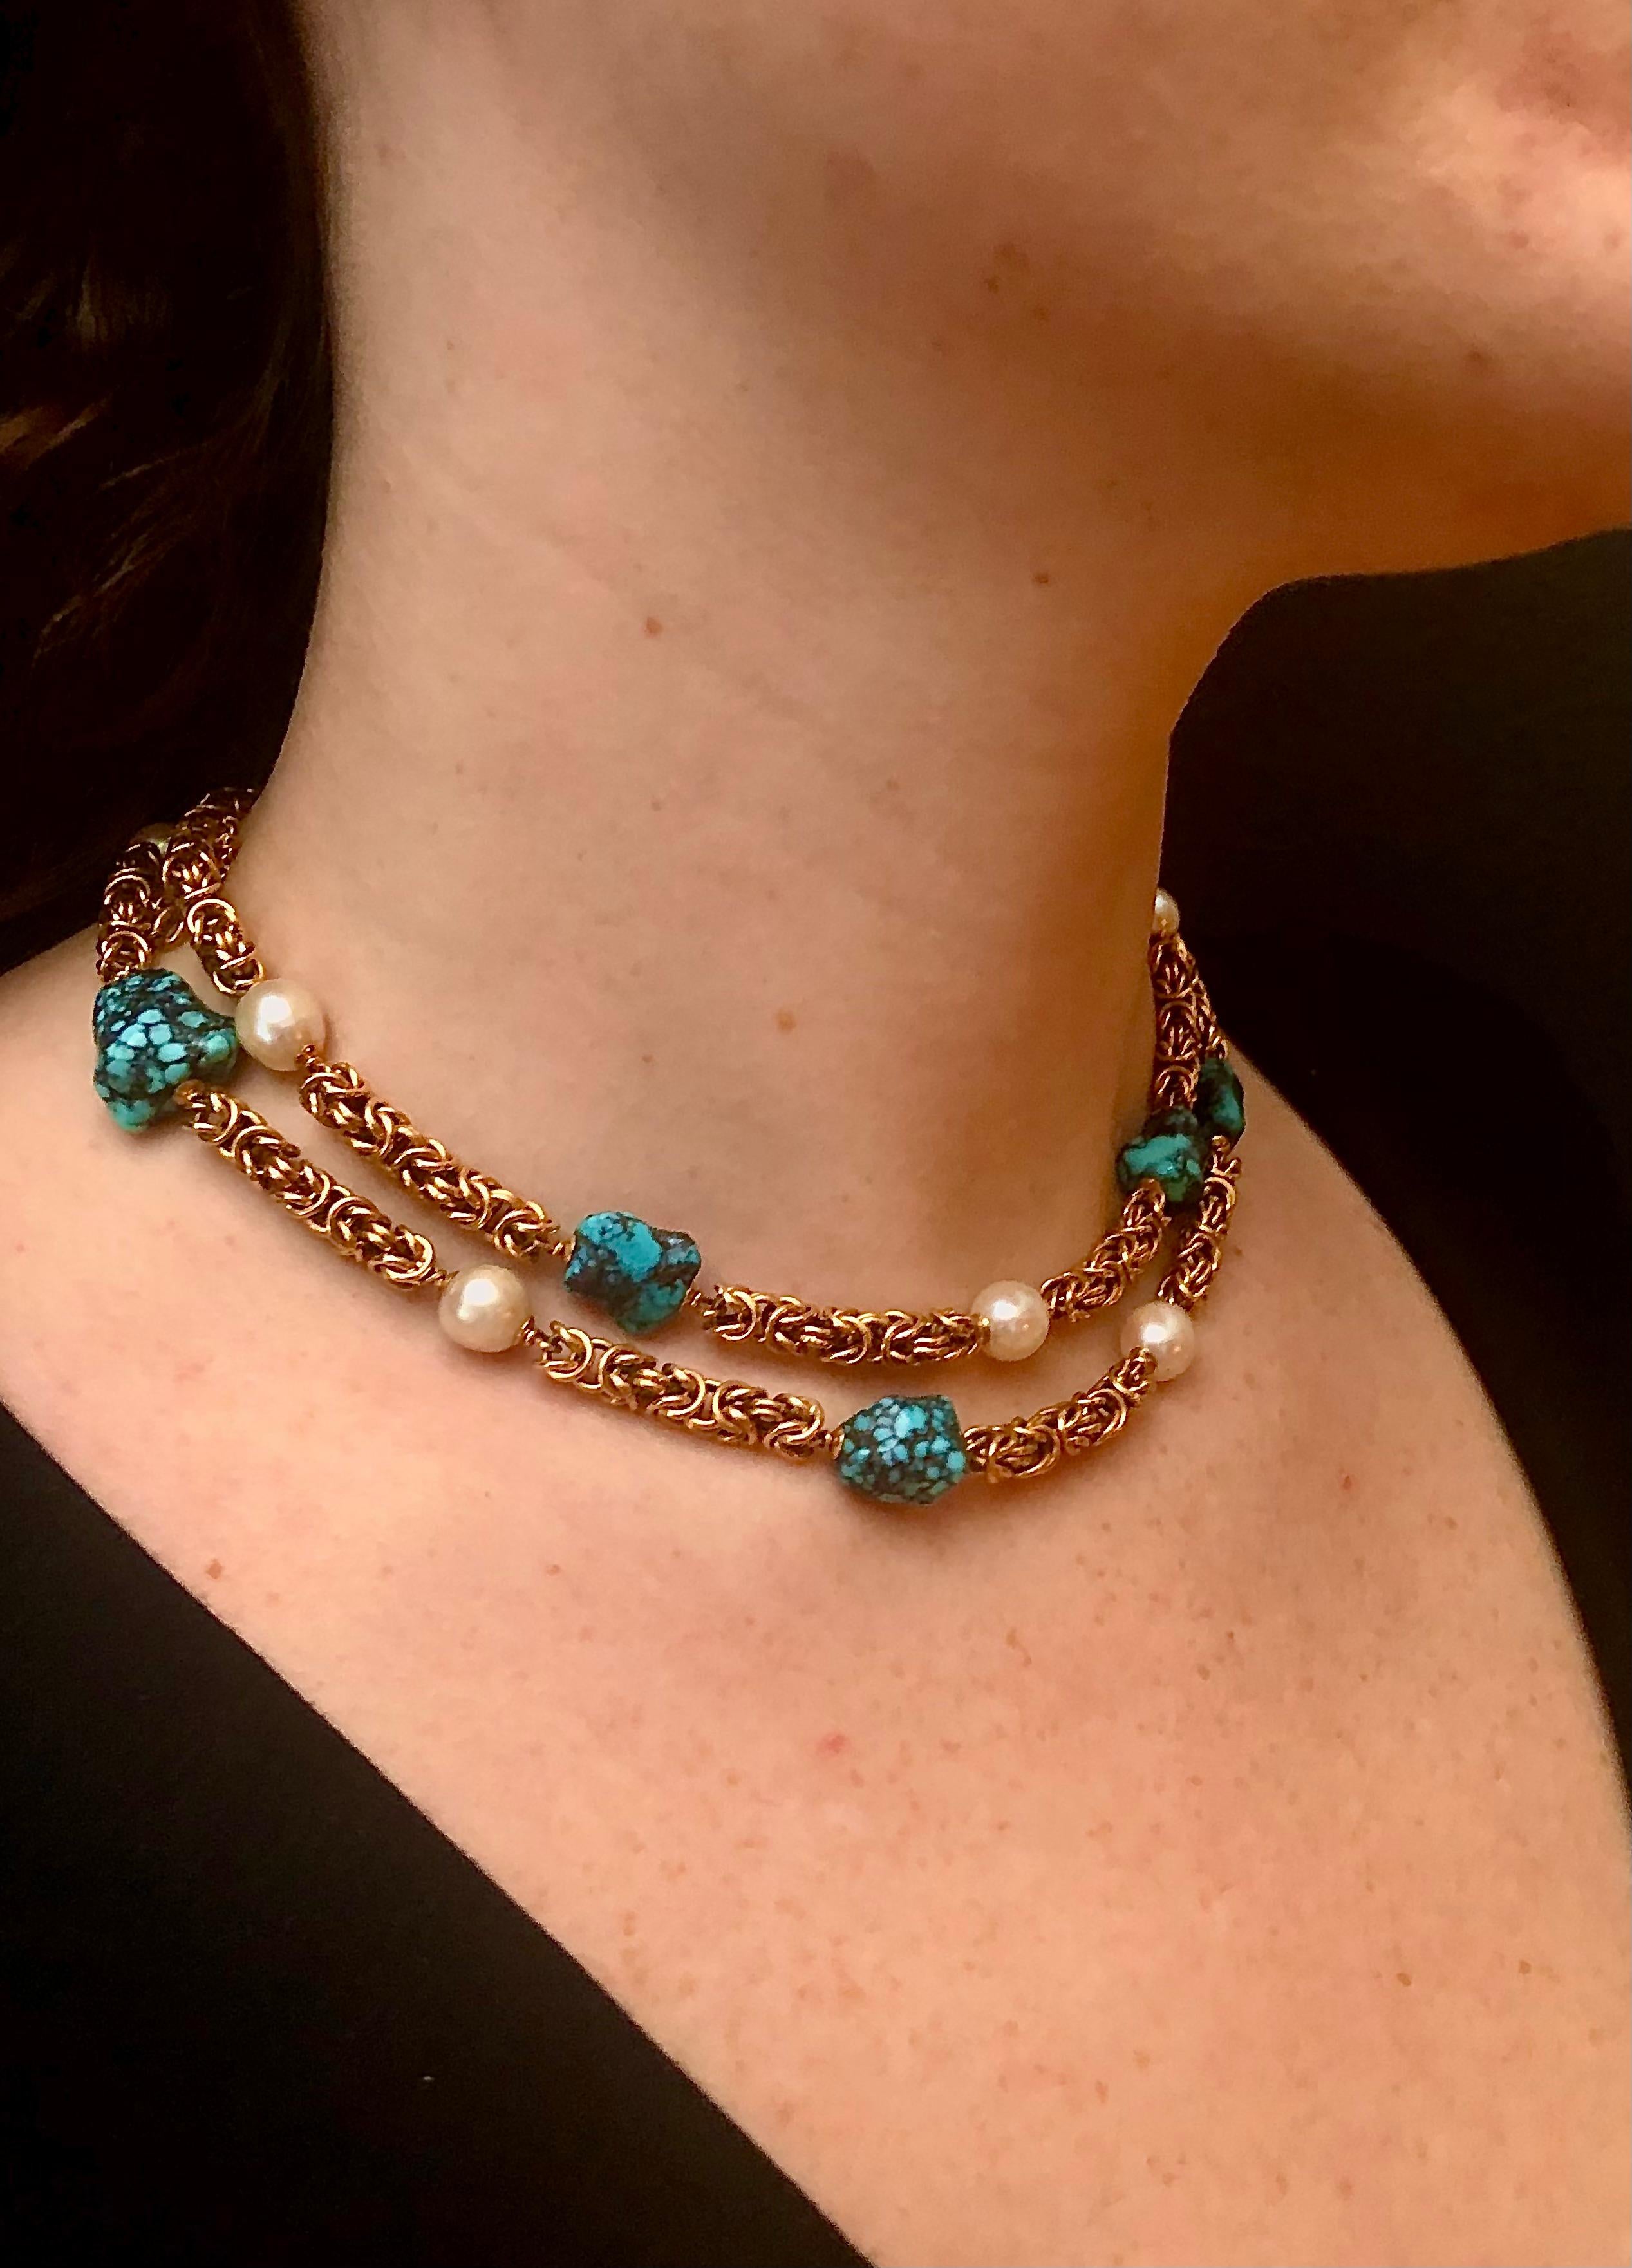 Heavy, spectacular gold Byzantine complex chain in 19.02 high kt gold interspersed with creamy white oval cultured pearls and turquoise nuggets.

The pearls have very faint blue/gold overtones and are a high luster. Pearls measure approximately 9mm